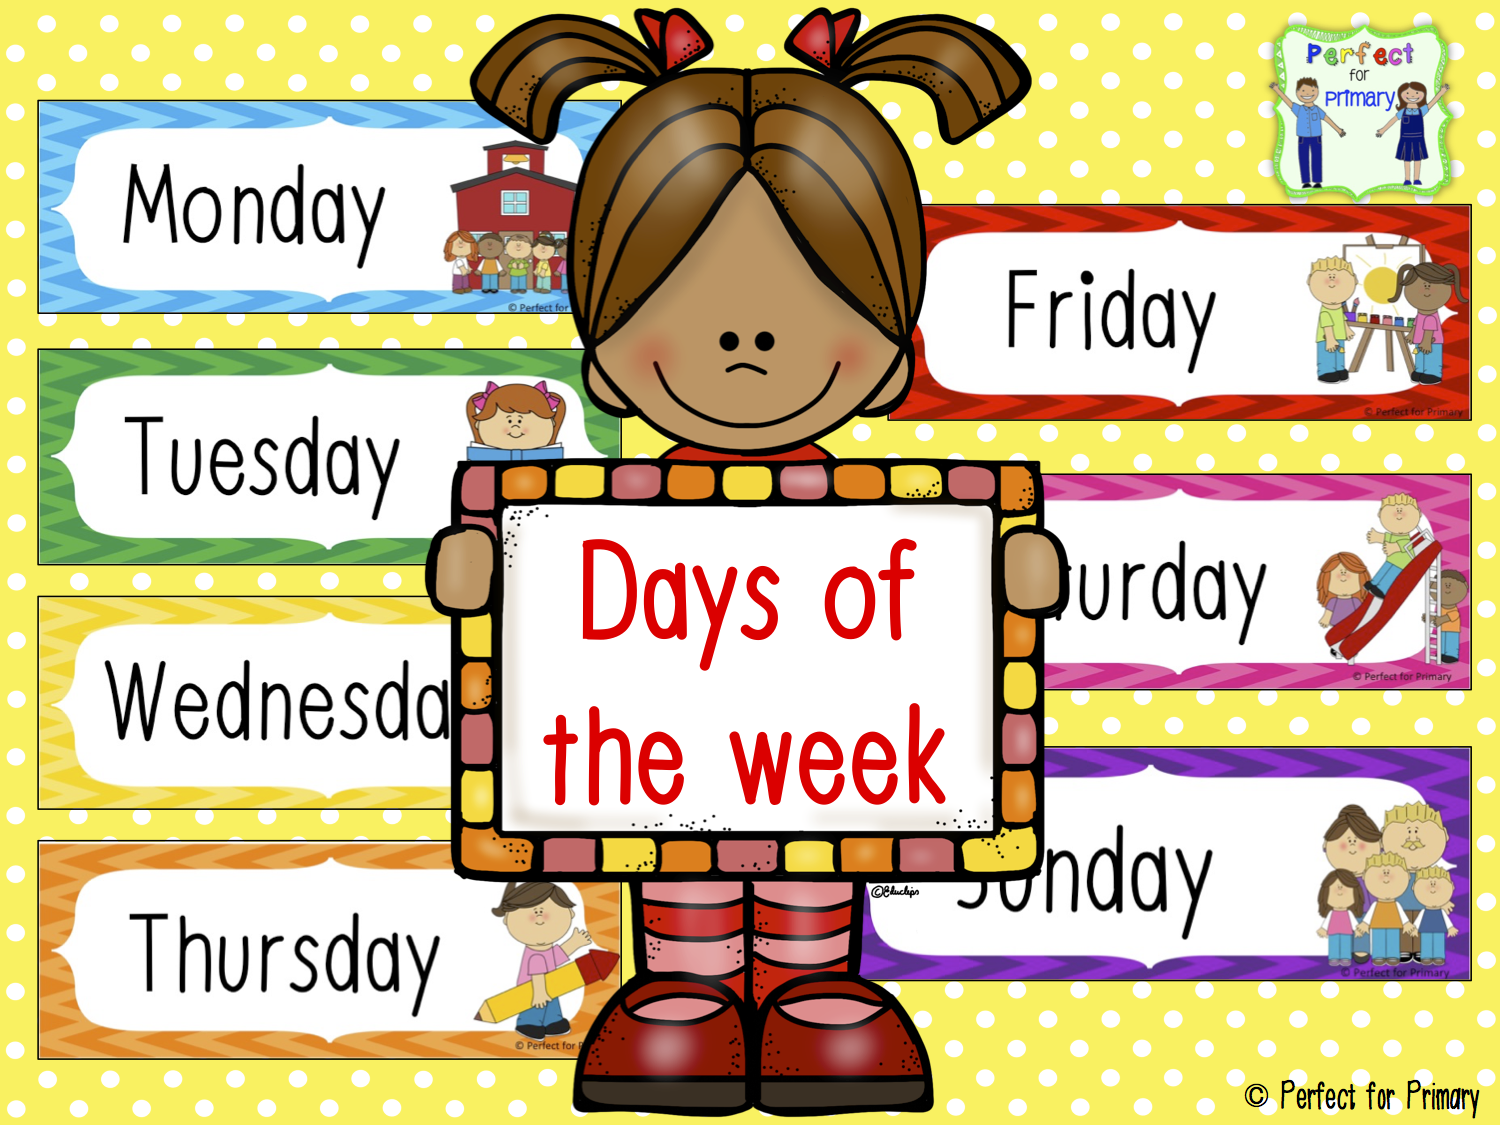 days-of-the-week-flashcards-new-updated-flashcards-for-kids